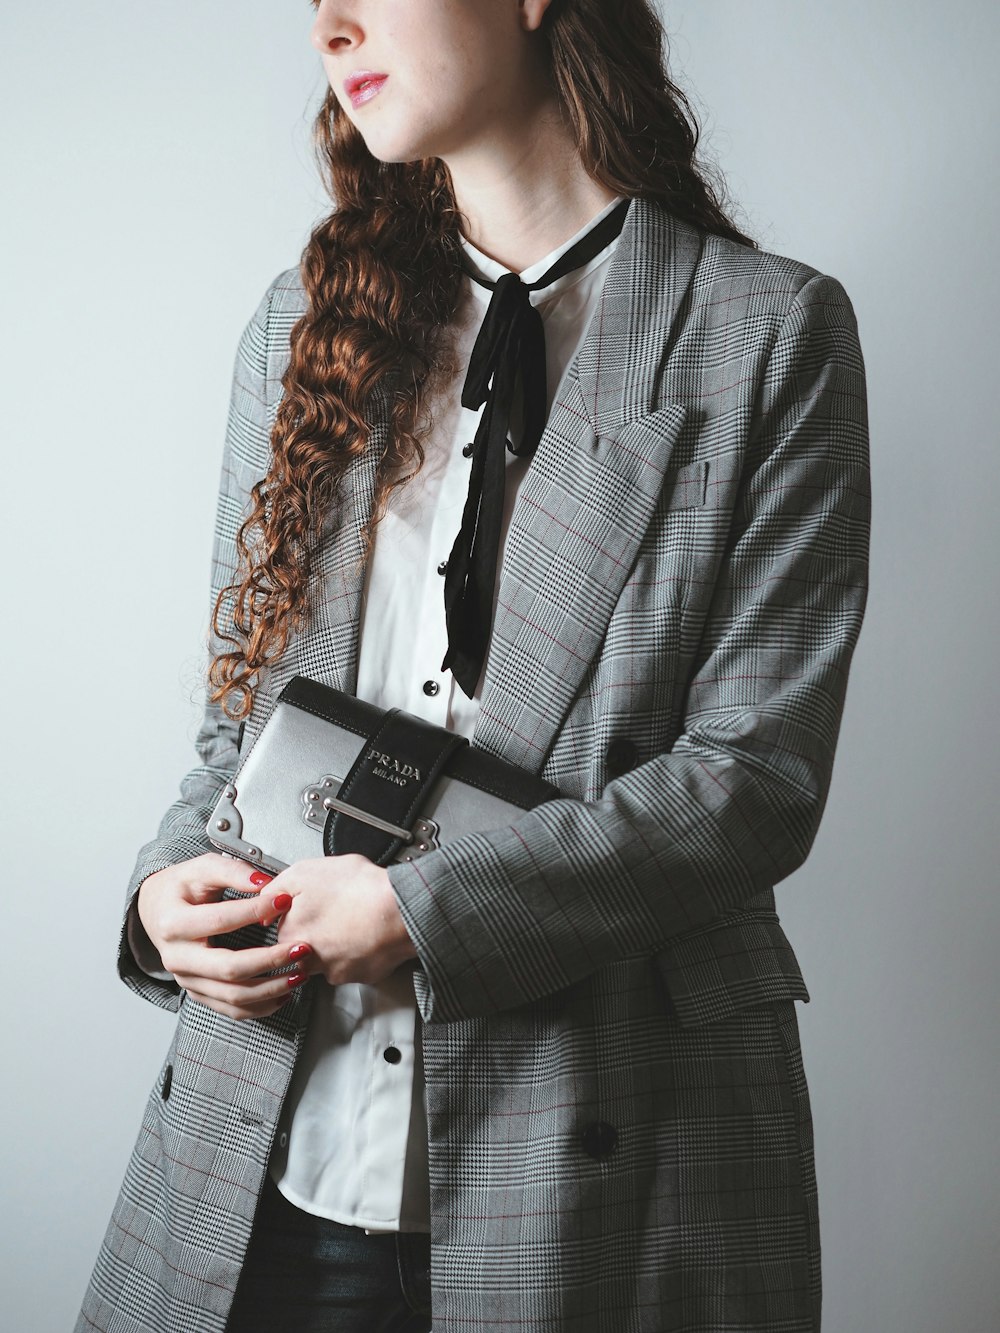 woman in black and white plaid blazer holding silver iphone 6